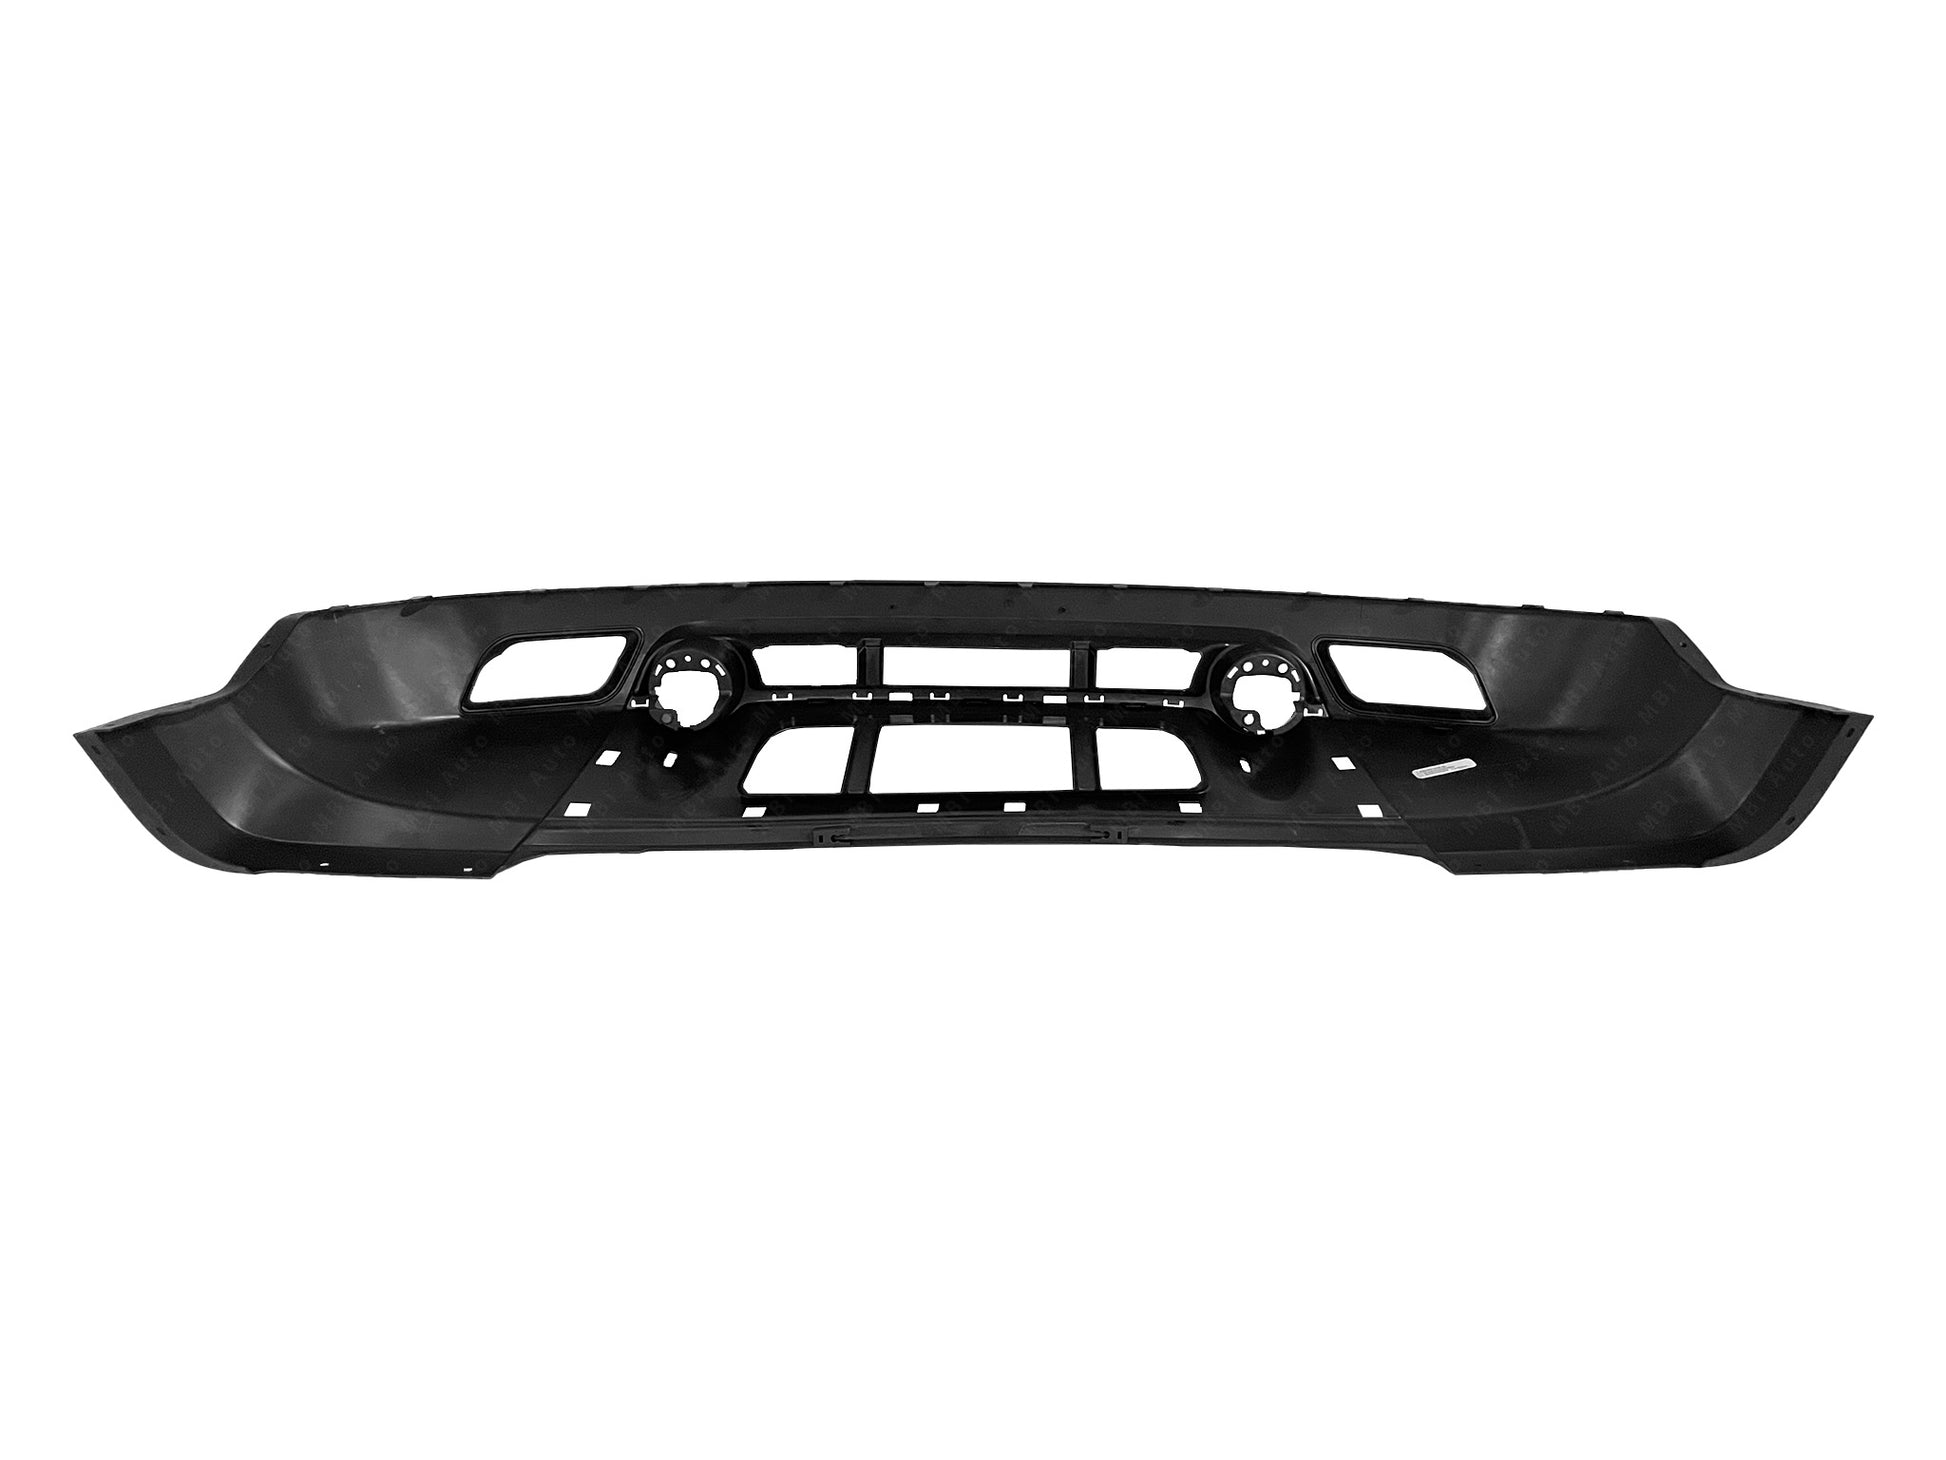 Jeep Patriot 2011 - 2017 Front Textured Lower Bumper Cover 11 - 17 CH1015112 Bumper-King